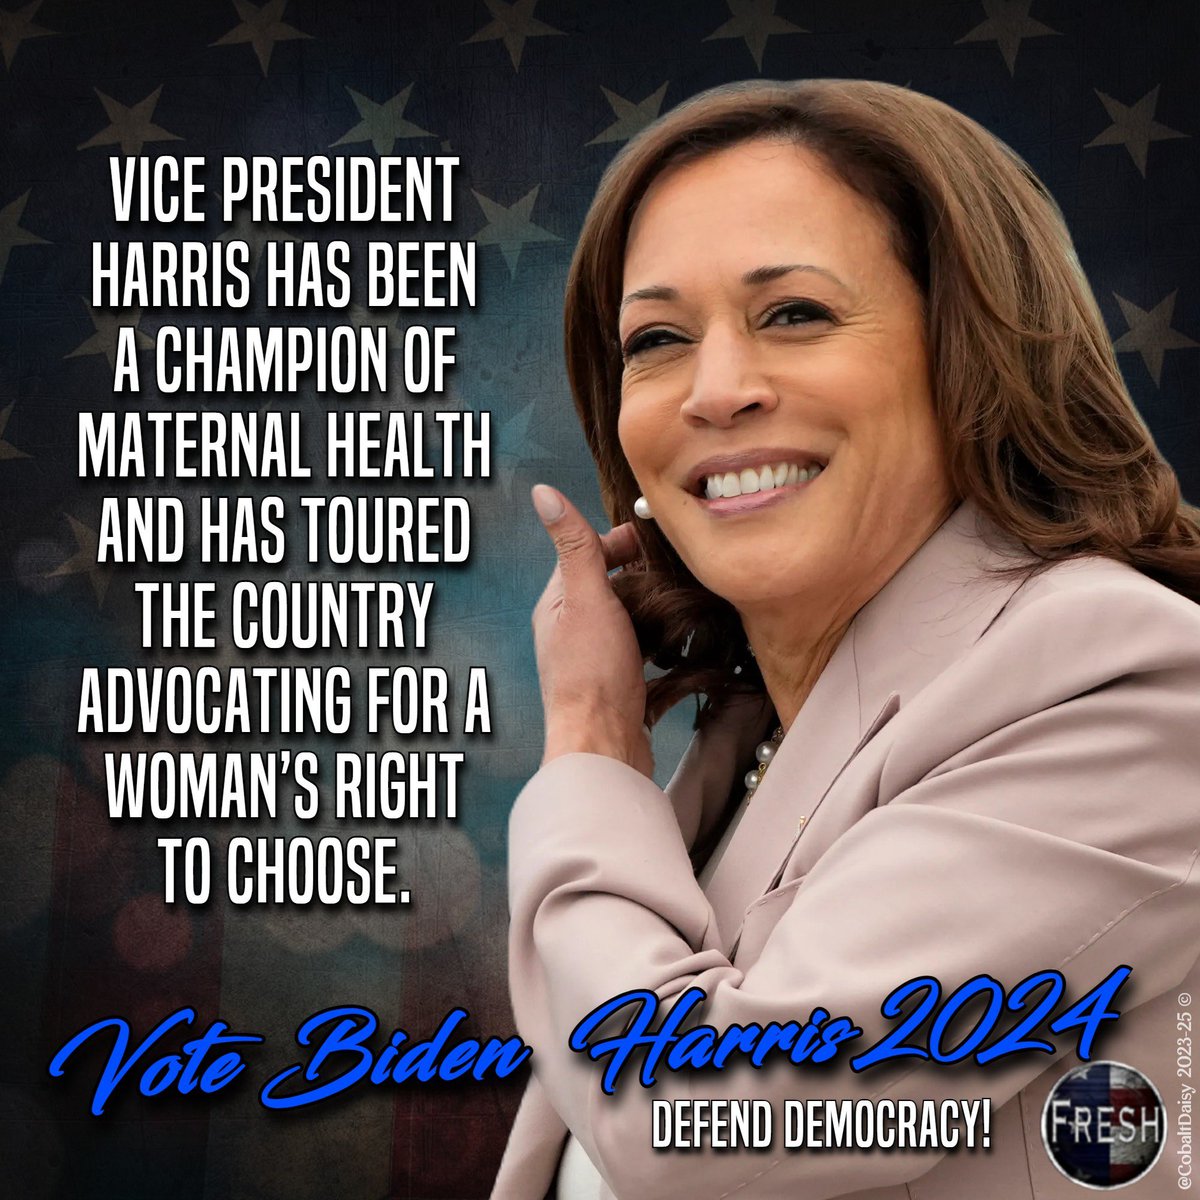 “Women in every state must have the freedom to choose if and when they become a mother” VP #KamalaHarris There is no greater advocate for American women, their civil rights, families and personal liberties than VP Kamala Harris! #FreshUnity #4MoreYears